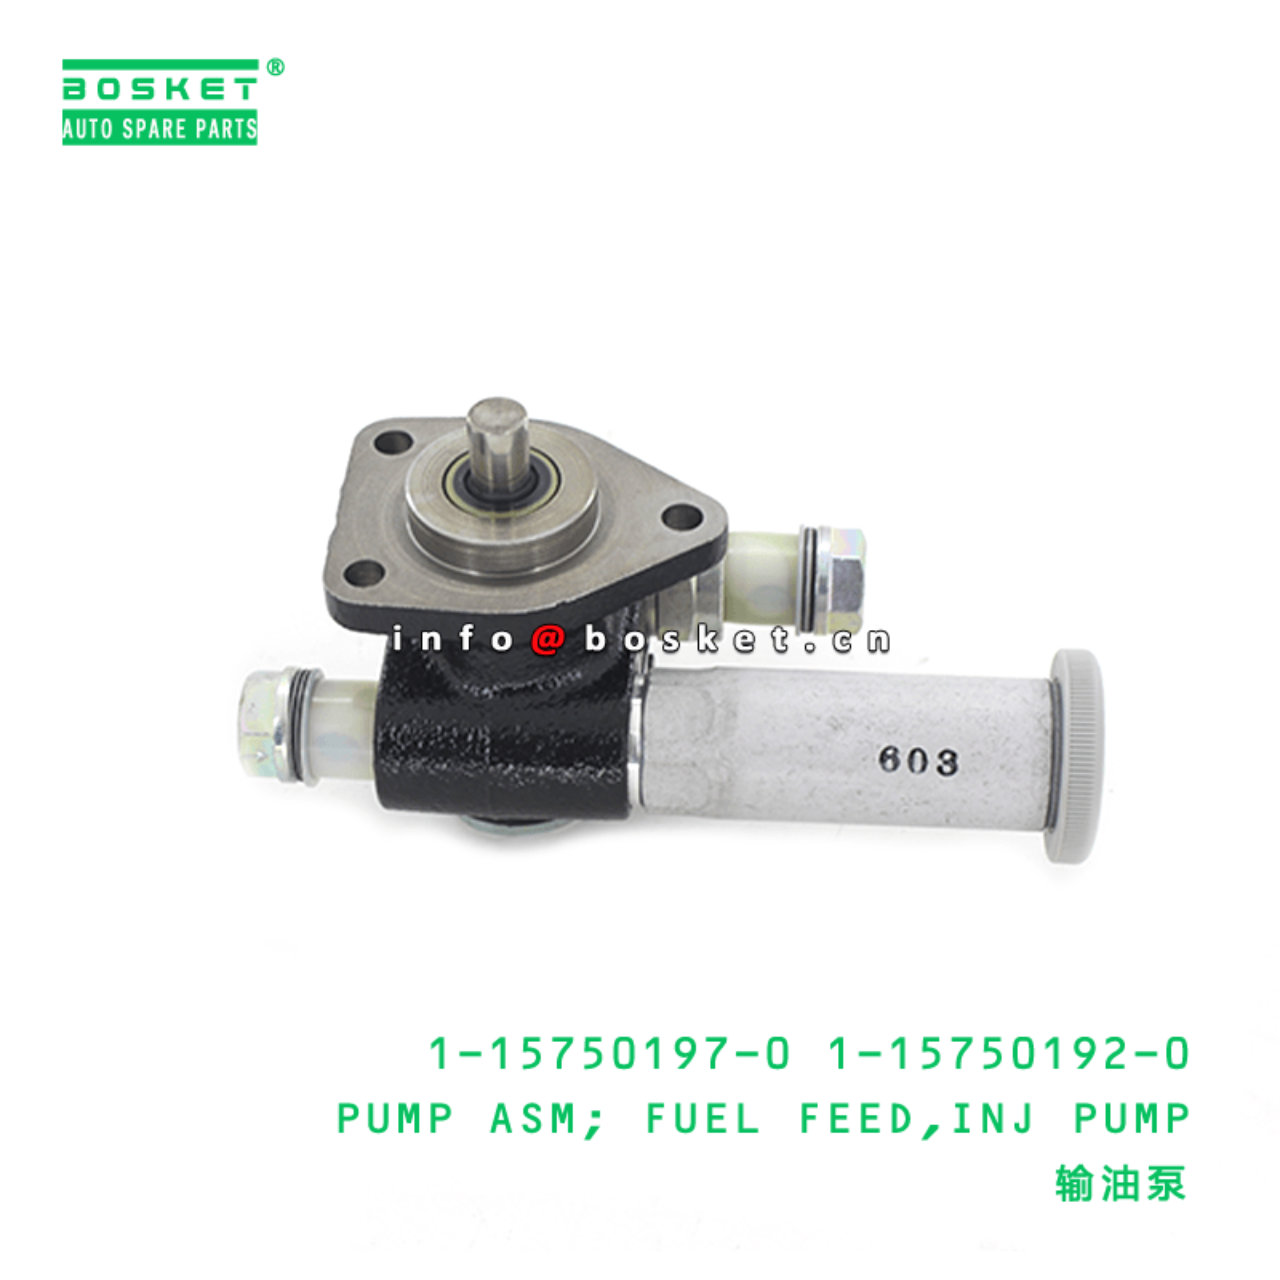 1-15750197-0 1-15750192-0 Injection Pump Fuel Feed Pump Assembly 1157501970 1157501920 Suitable for 